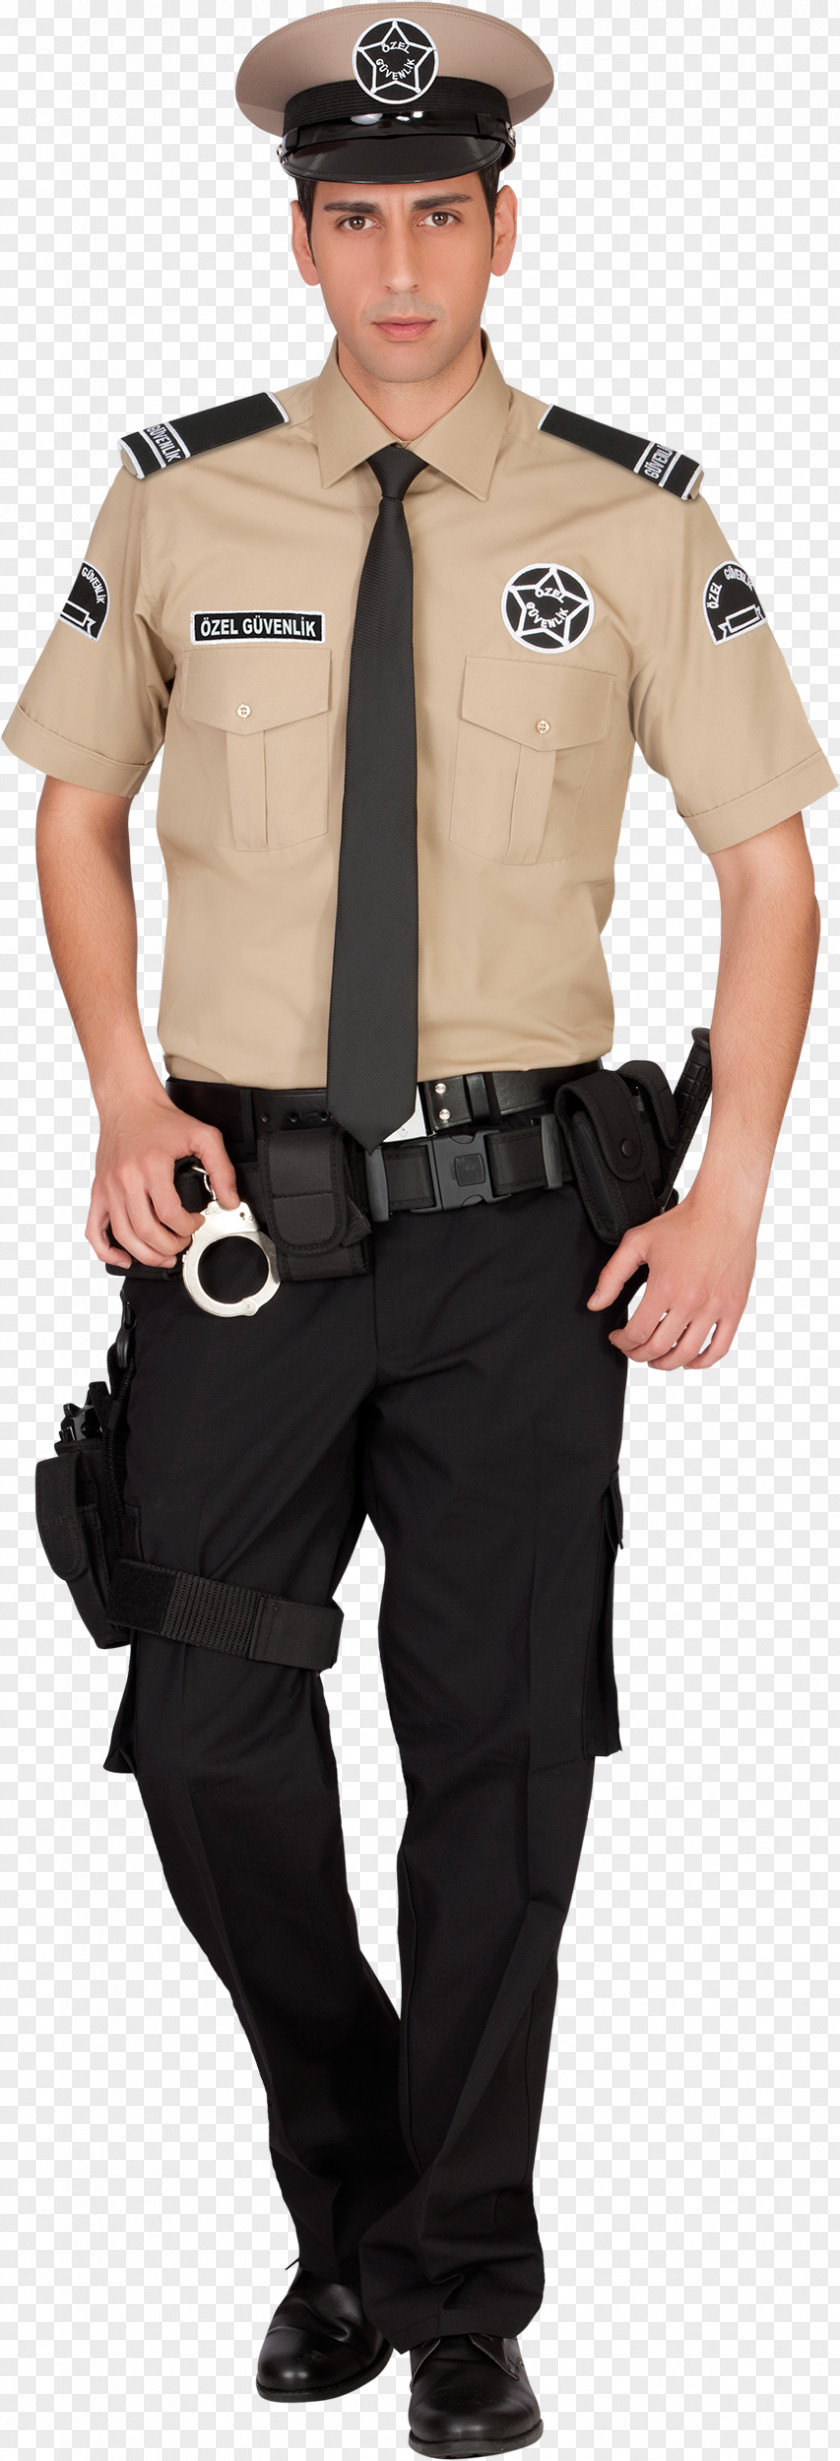 Police Officer Security Guard Military Uniform PNG